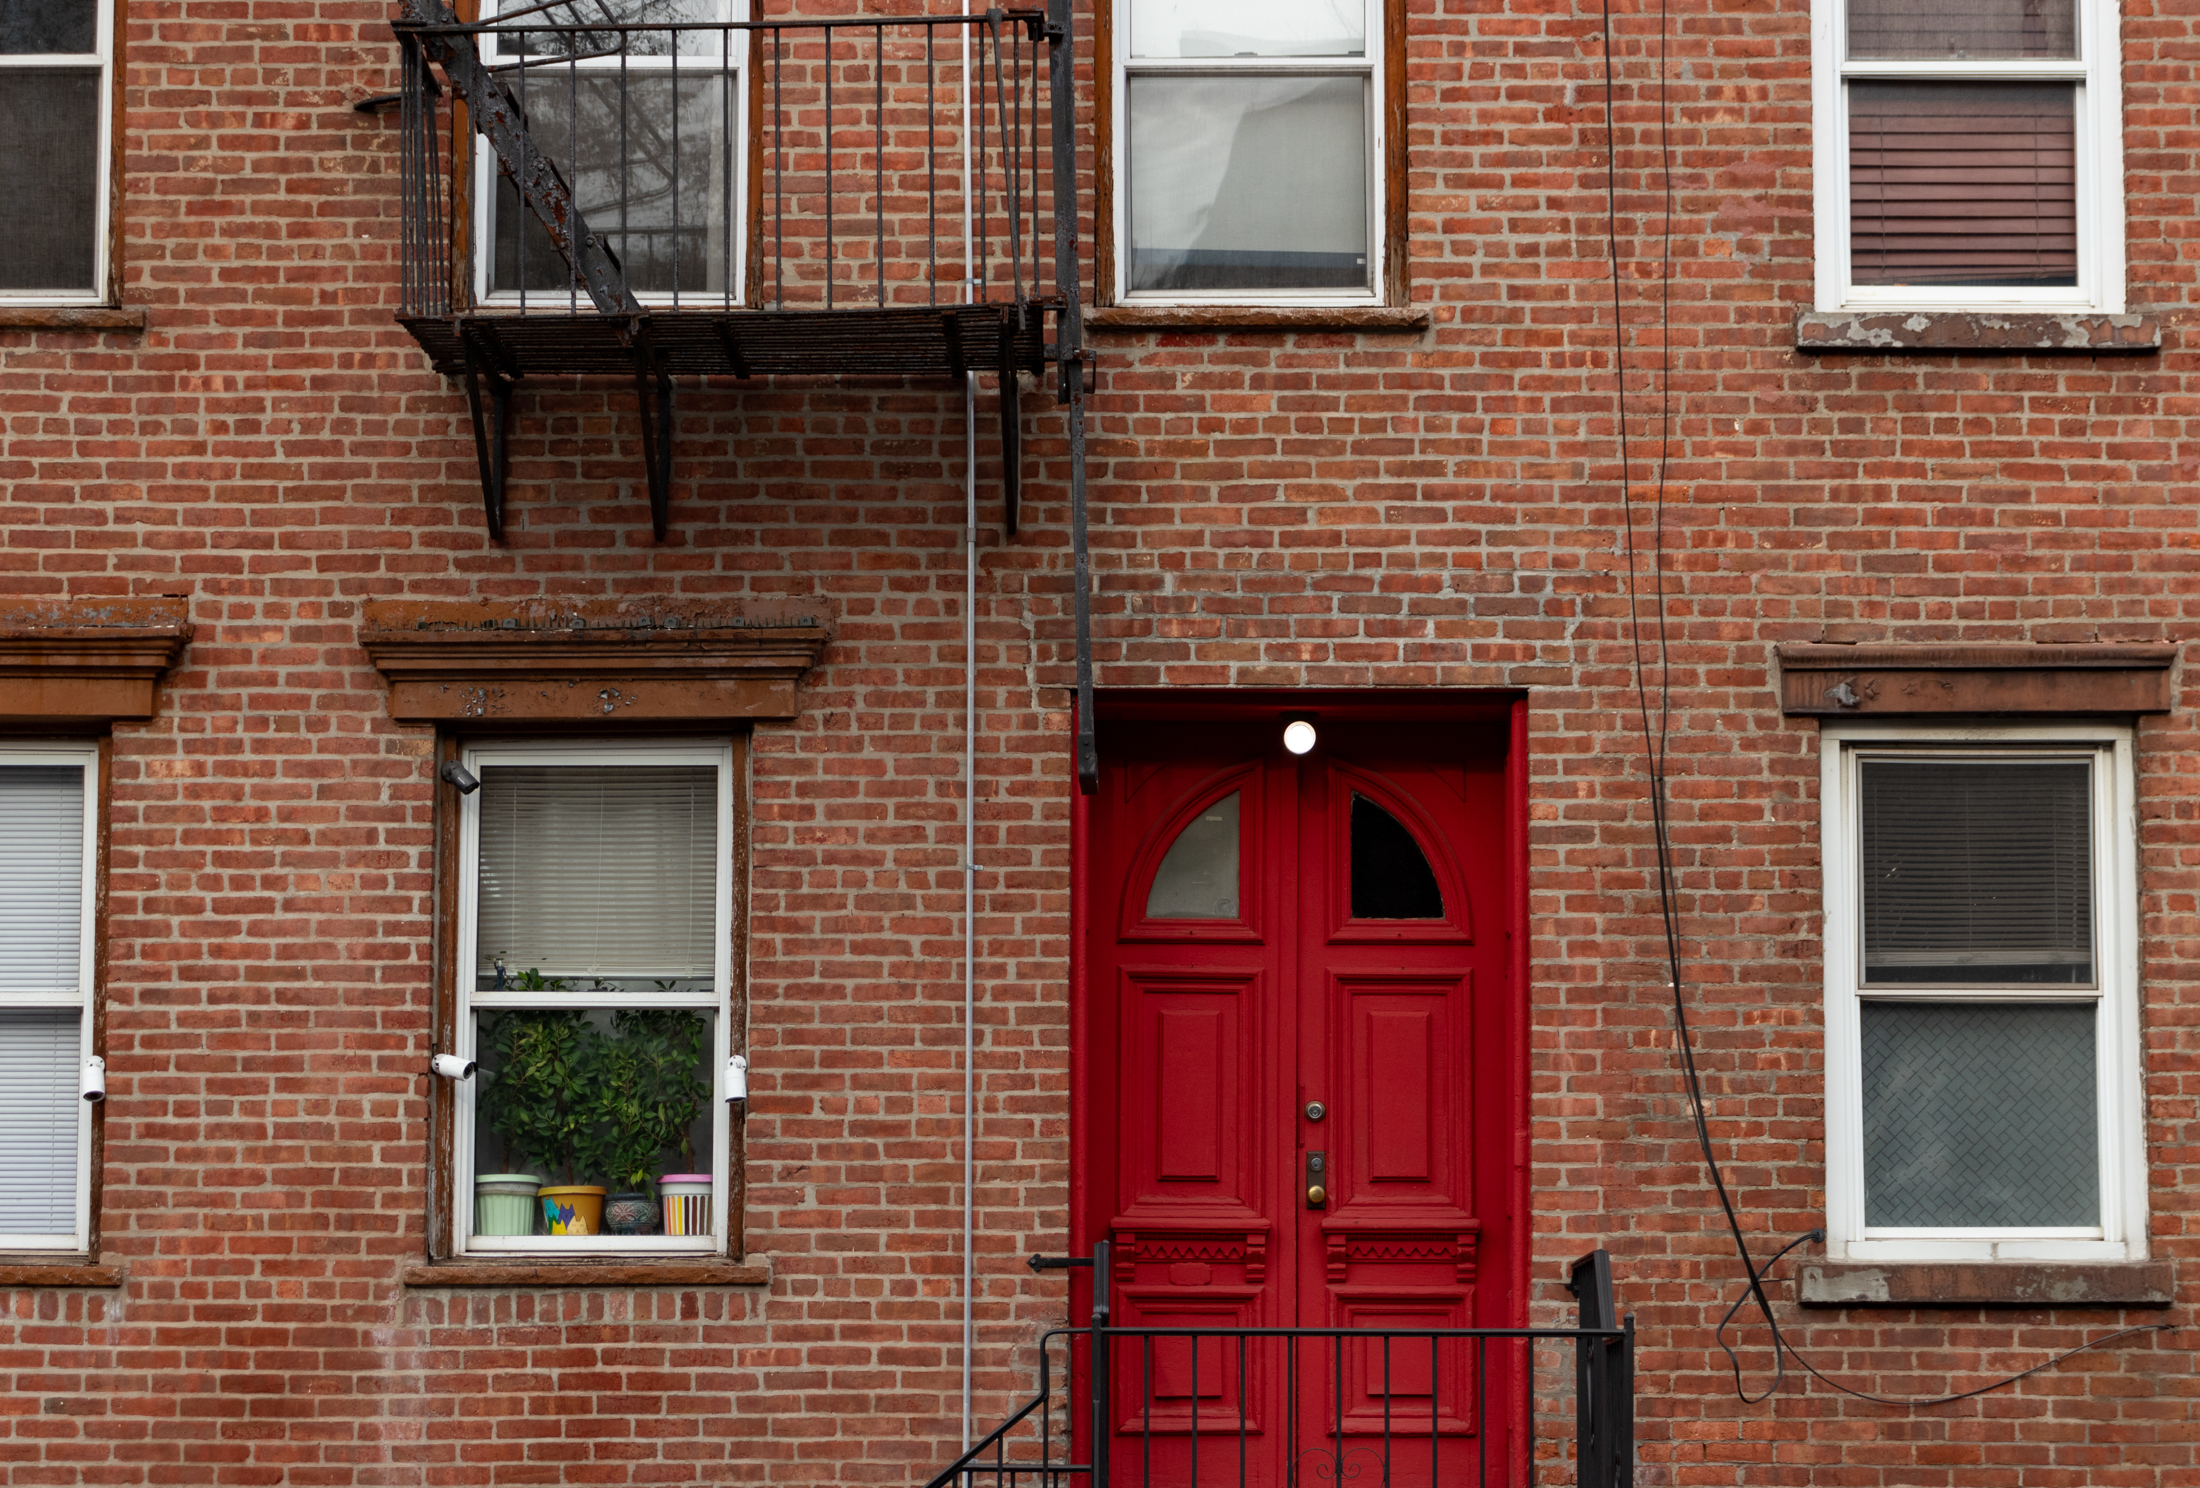 williamsburg - red door in a brick row house